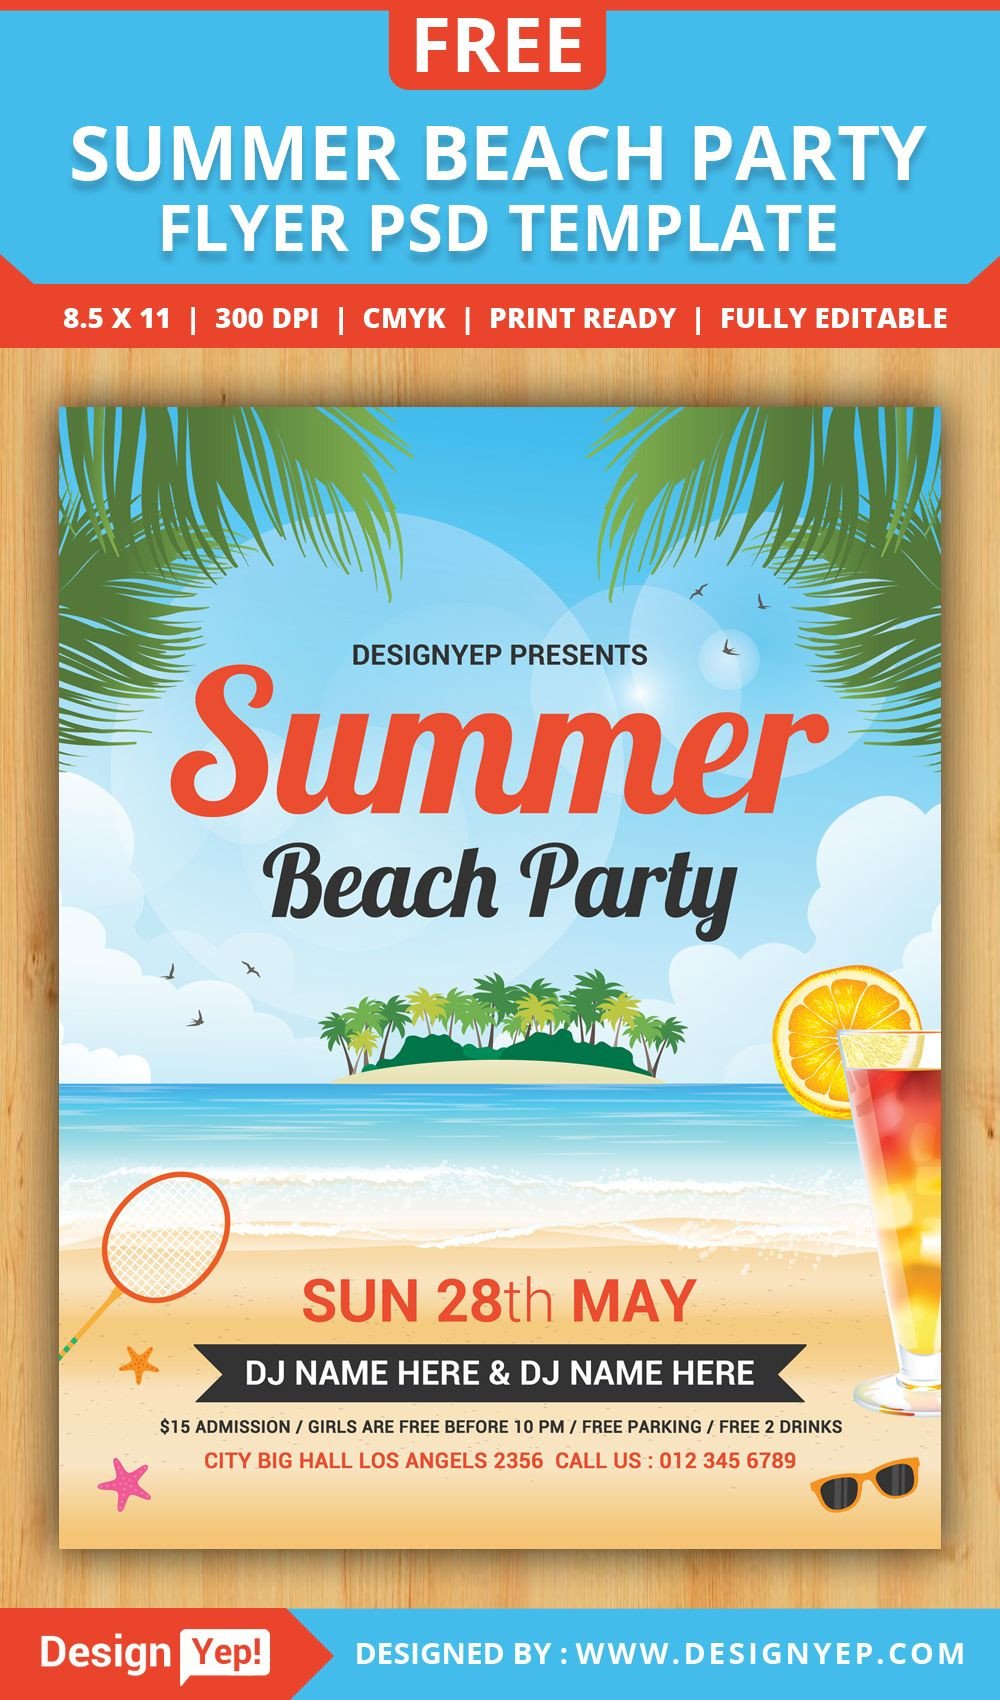 Templates for Flyers Free Free Summer Beach Party Flyer Psd Template Desingyep